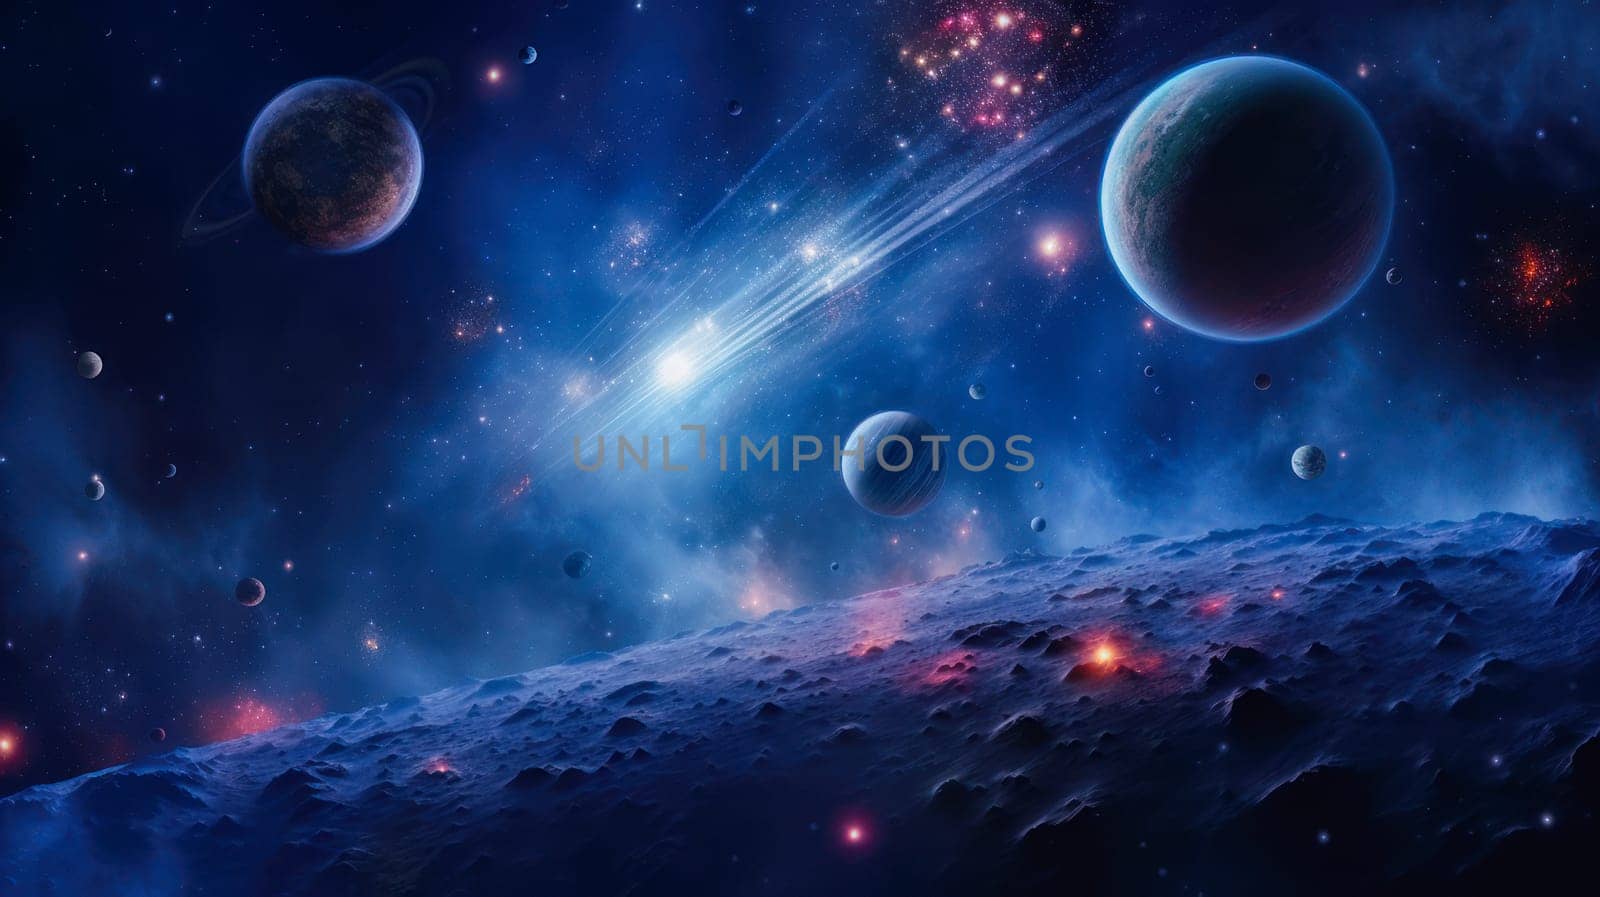 Sun, planets of the solar system and planet Earth, galaxies, stars, comet, asteroid, meteorite, nebula. Cosmic panorama of the Universe. Copy space, phone screensaver, beautiful picture. Astronomy science, travel into space